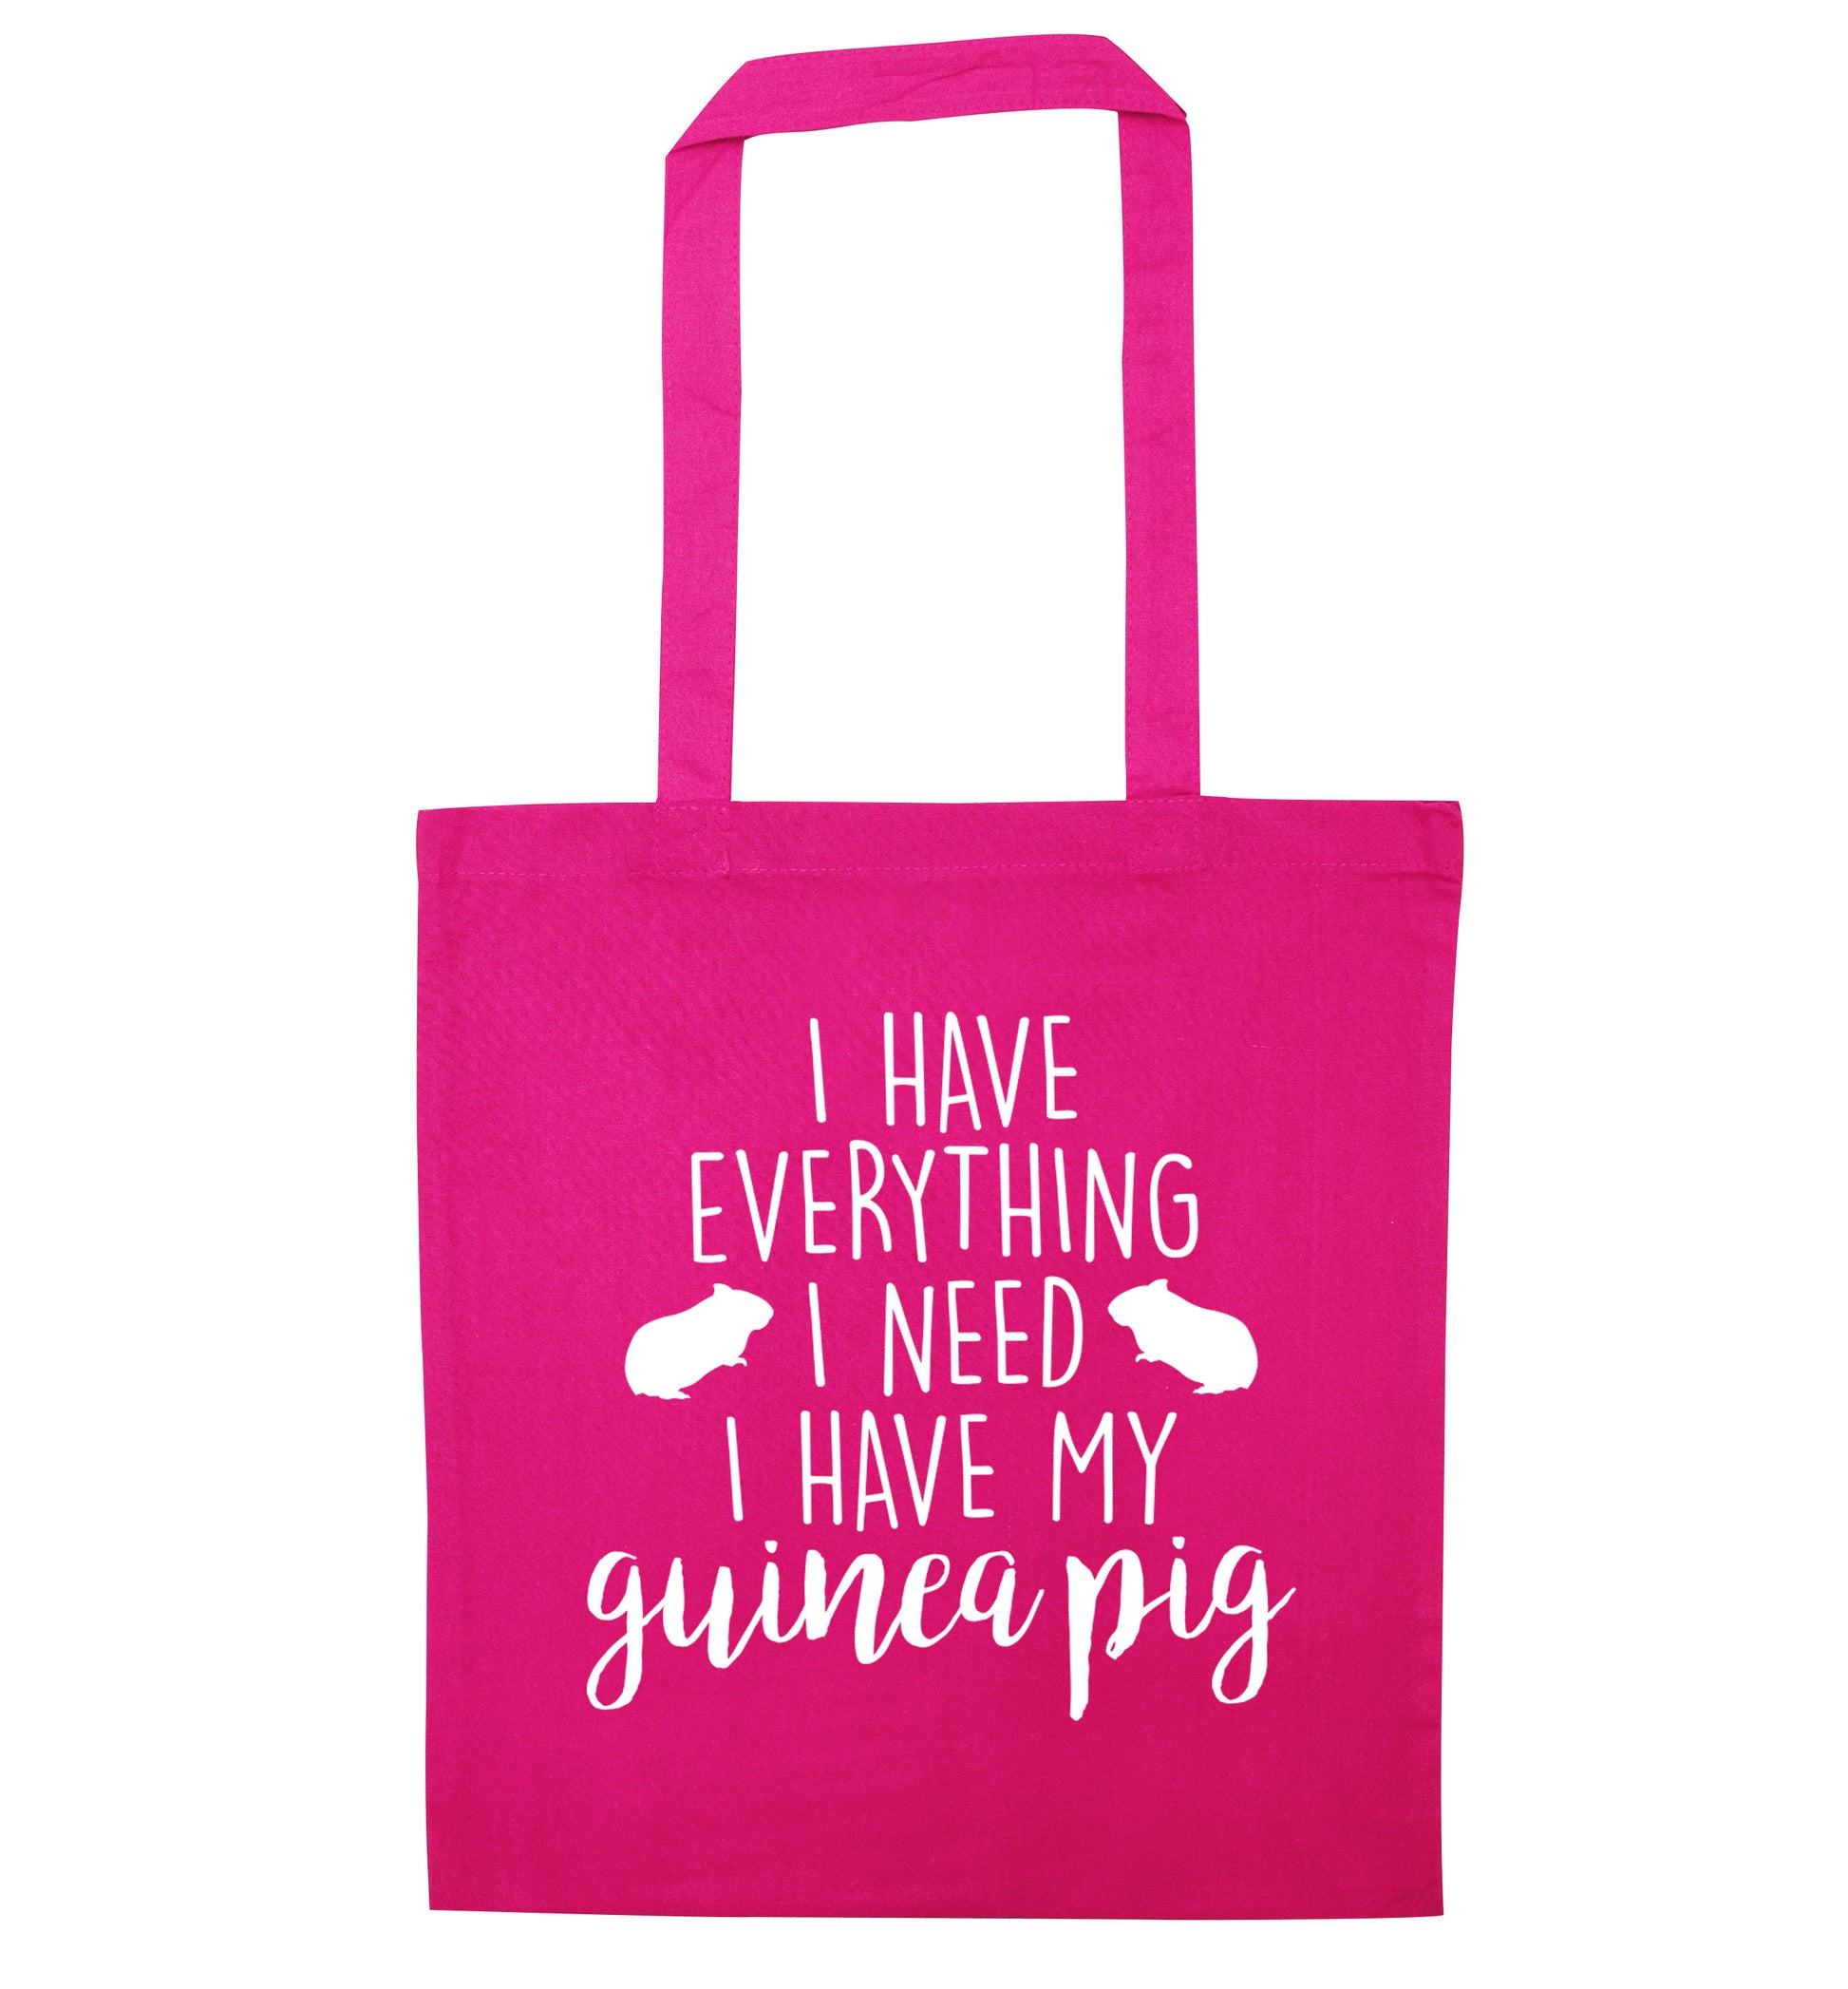 I have everything I need, I have my guinea pig pink tote bag